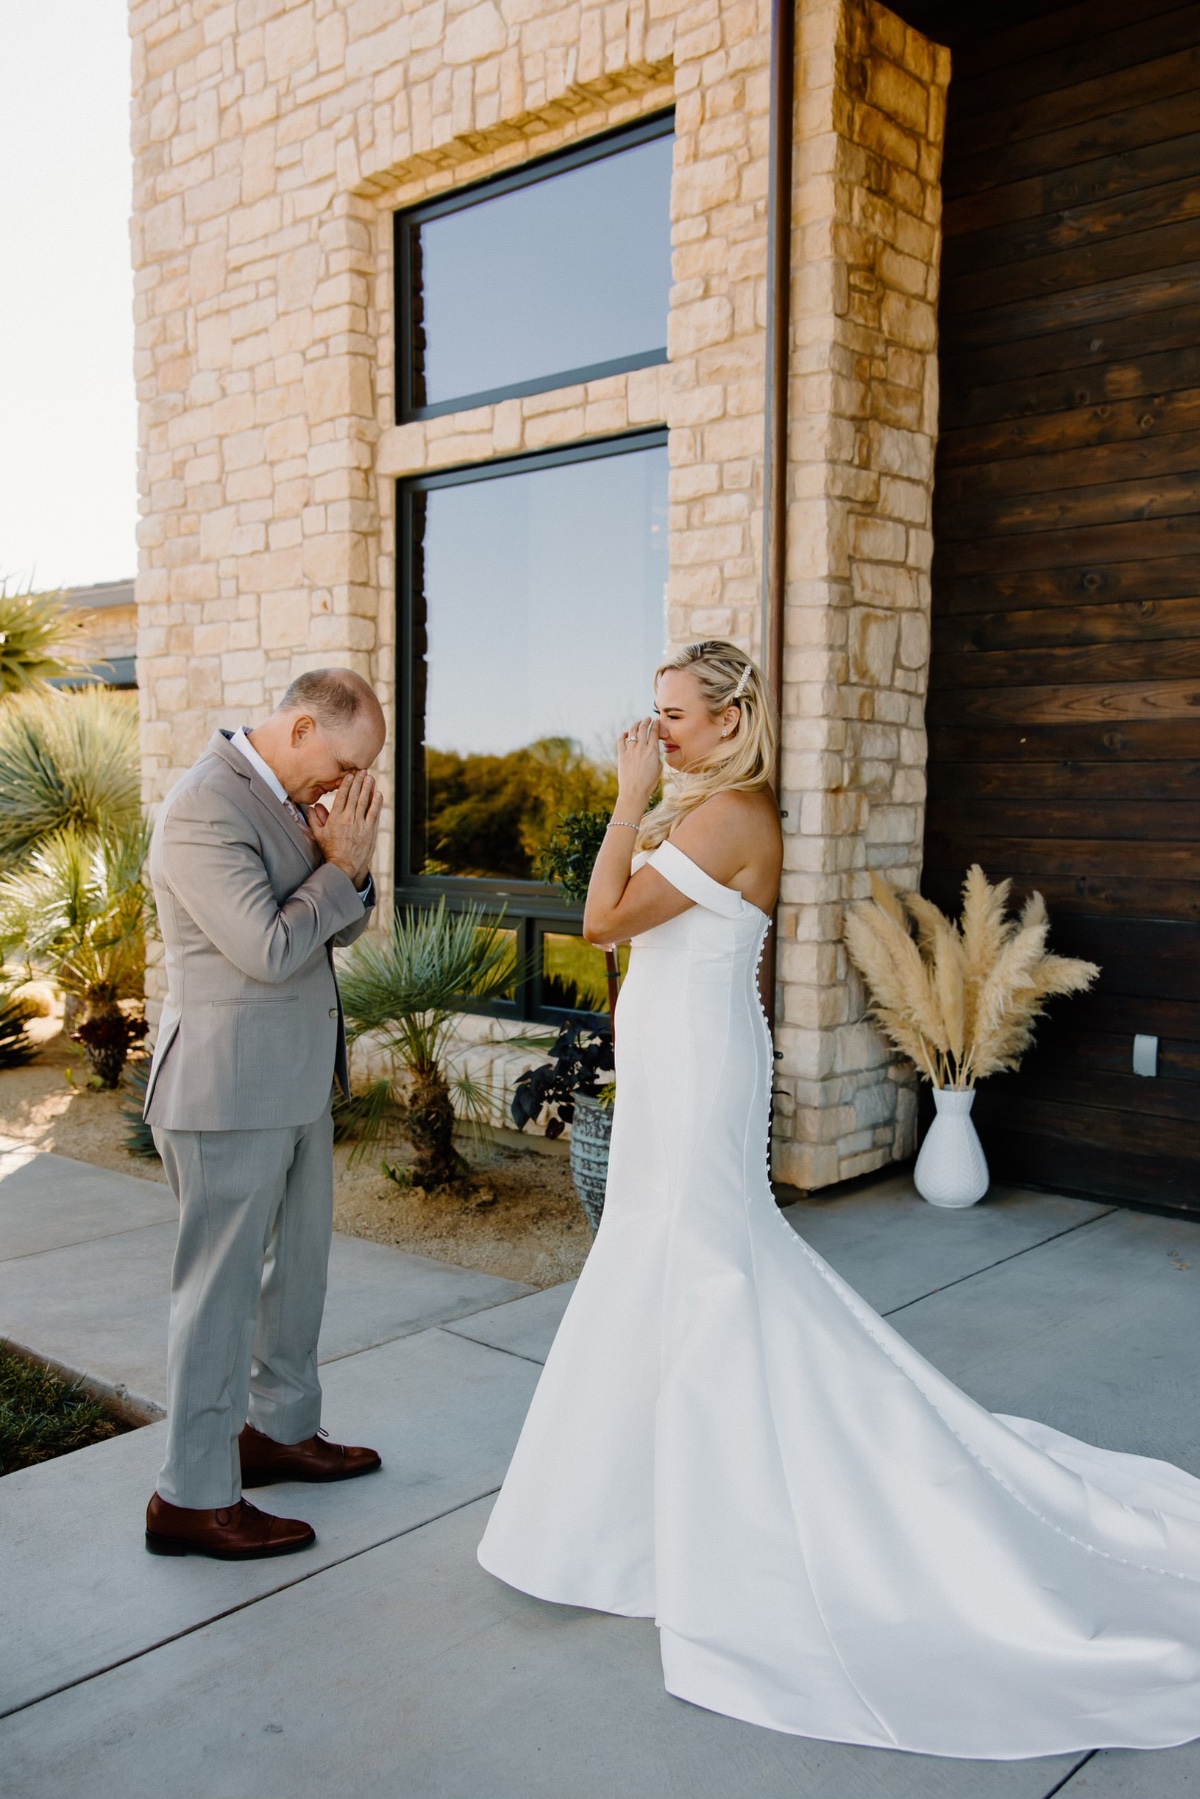 First Look With Bride's Dad